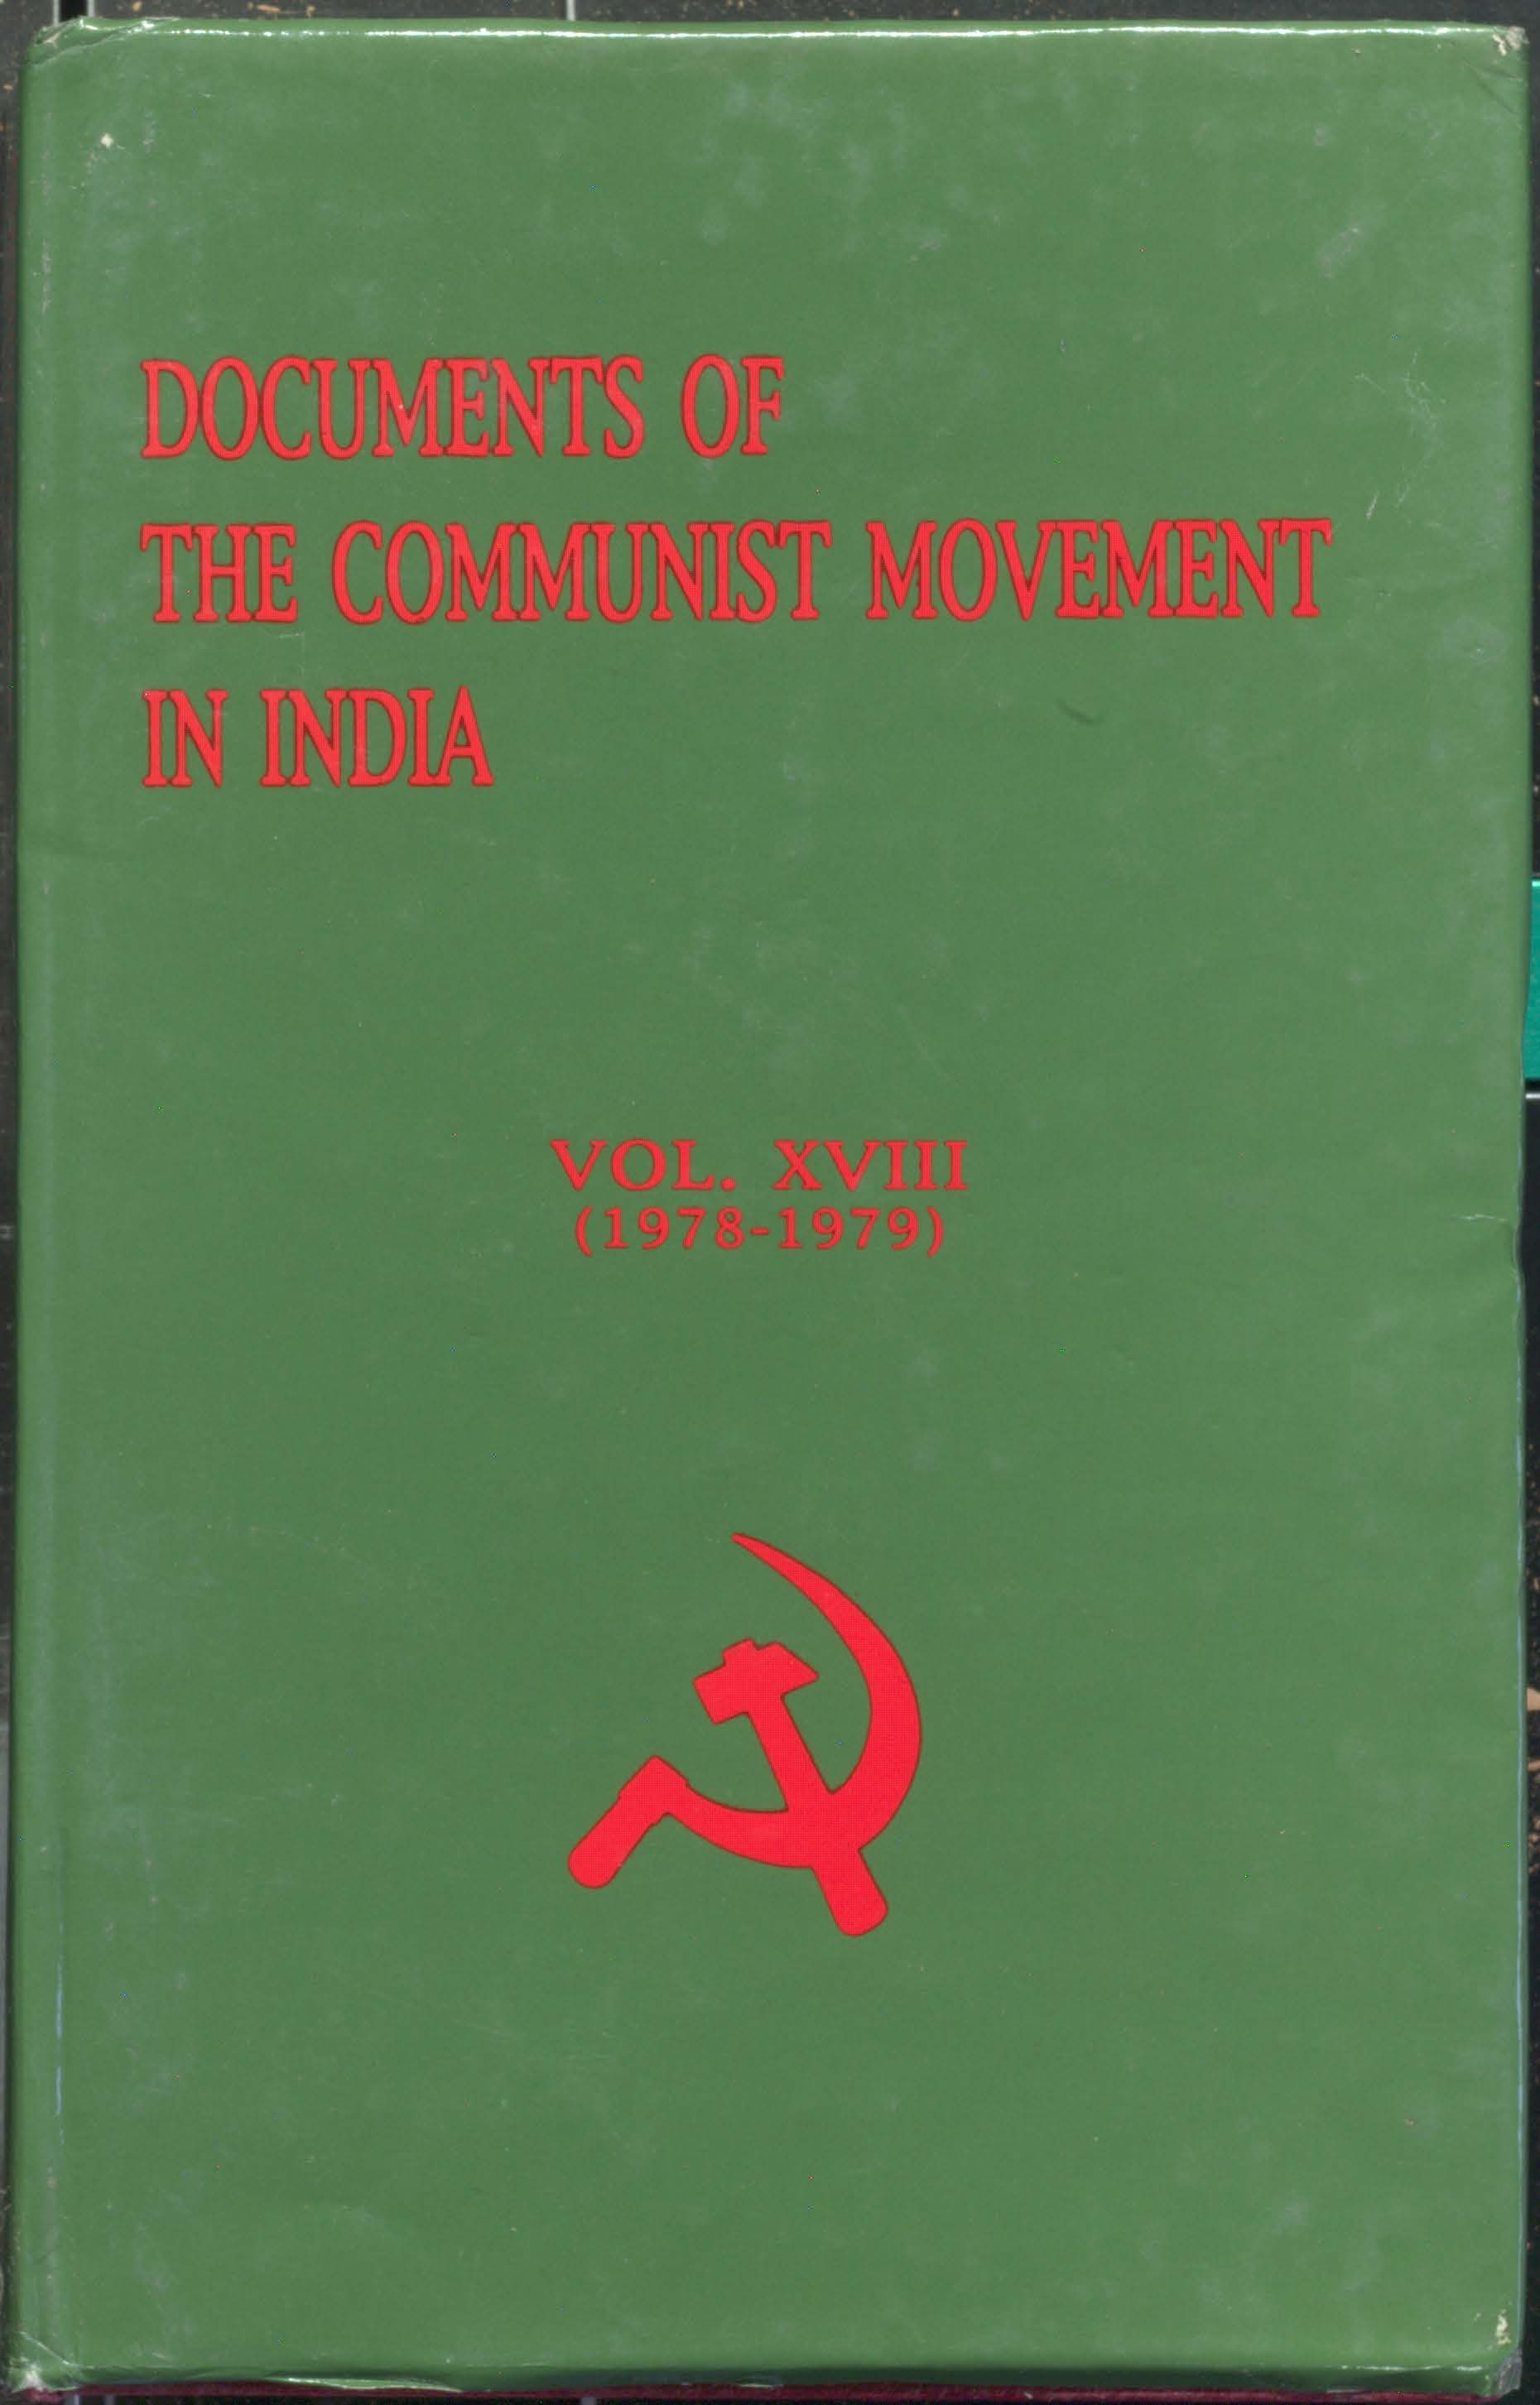 DOCUMENTS OF THE COMMUNIST MOVEMENT IN INDIA (vol-xvlll 1978-1979)